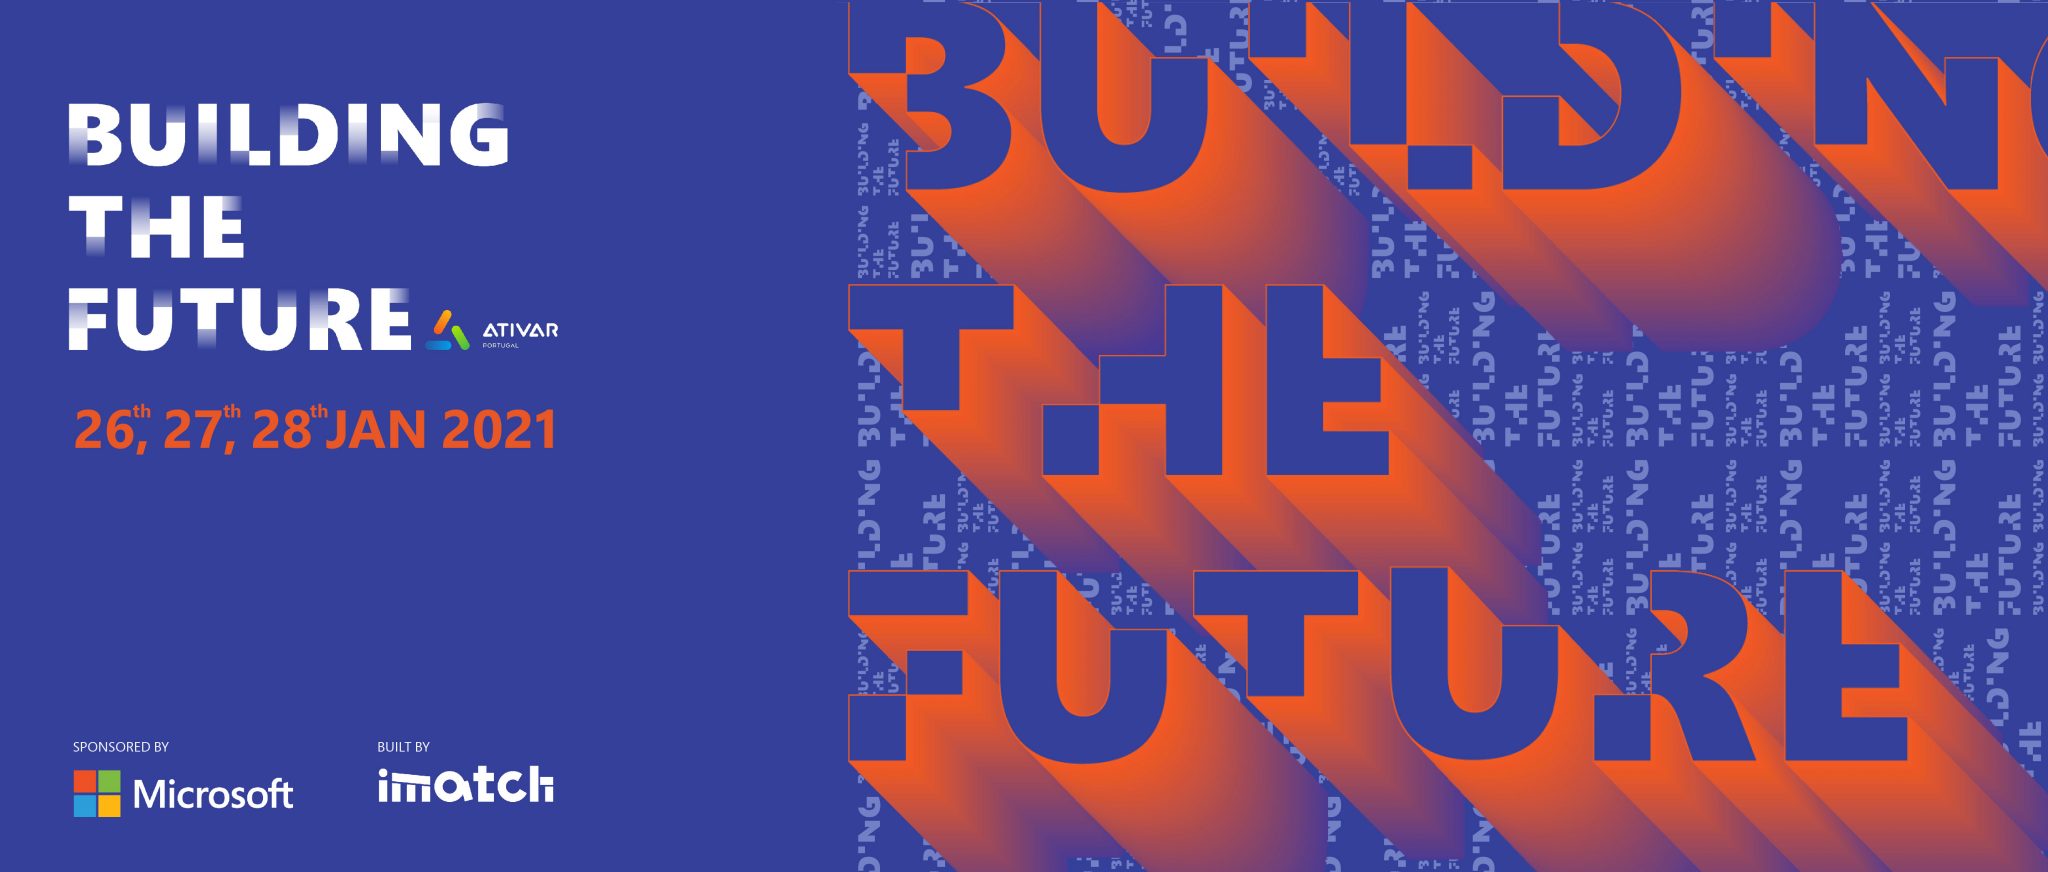 Building the Future 2021 - Link to Leaders